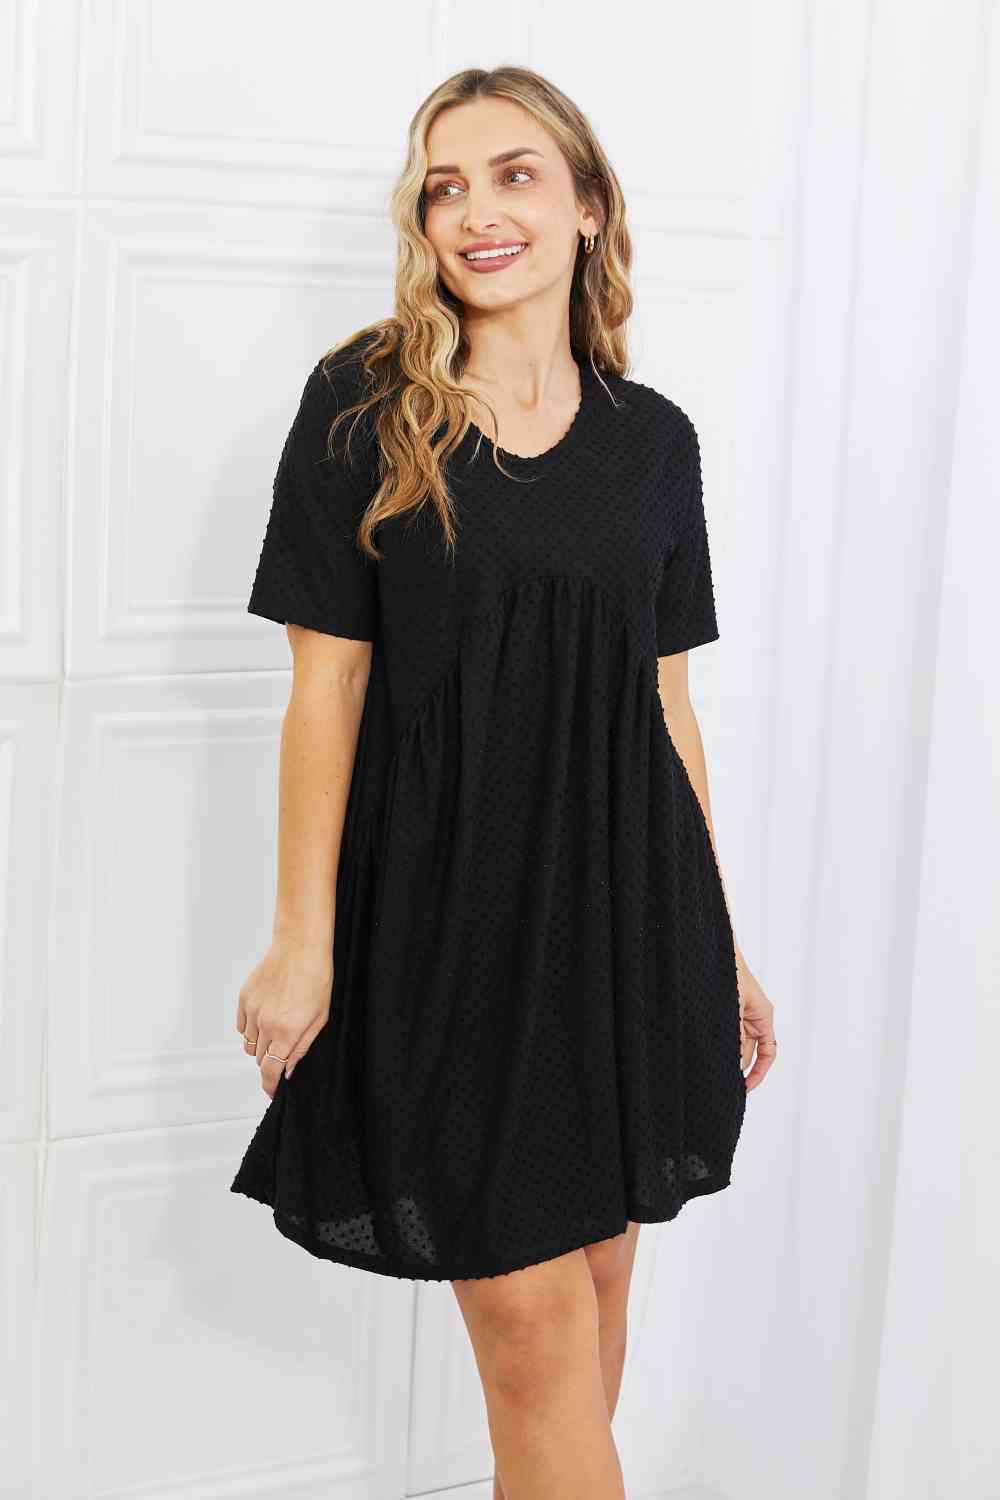 BOMBOM Another Day Swiss Dot Casual Dress in Black Black